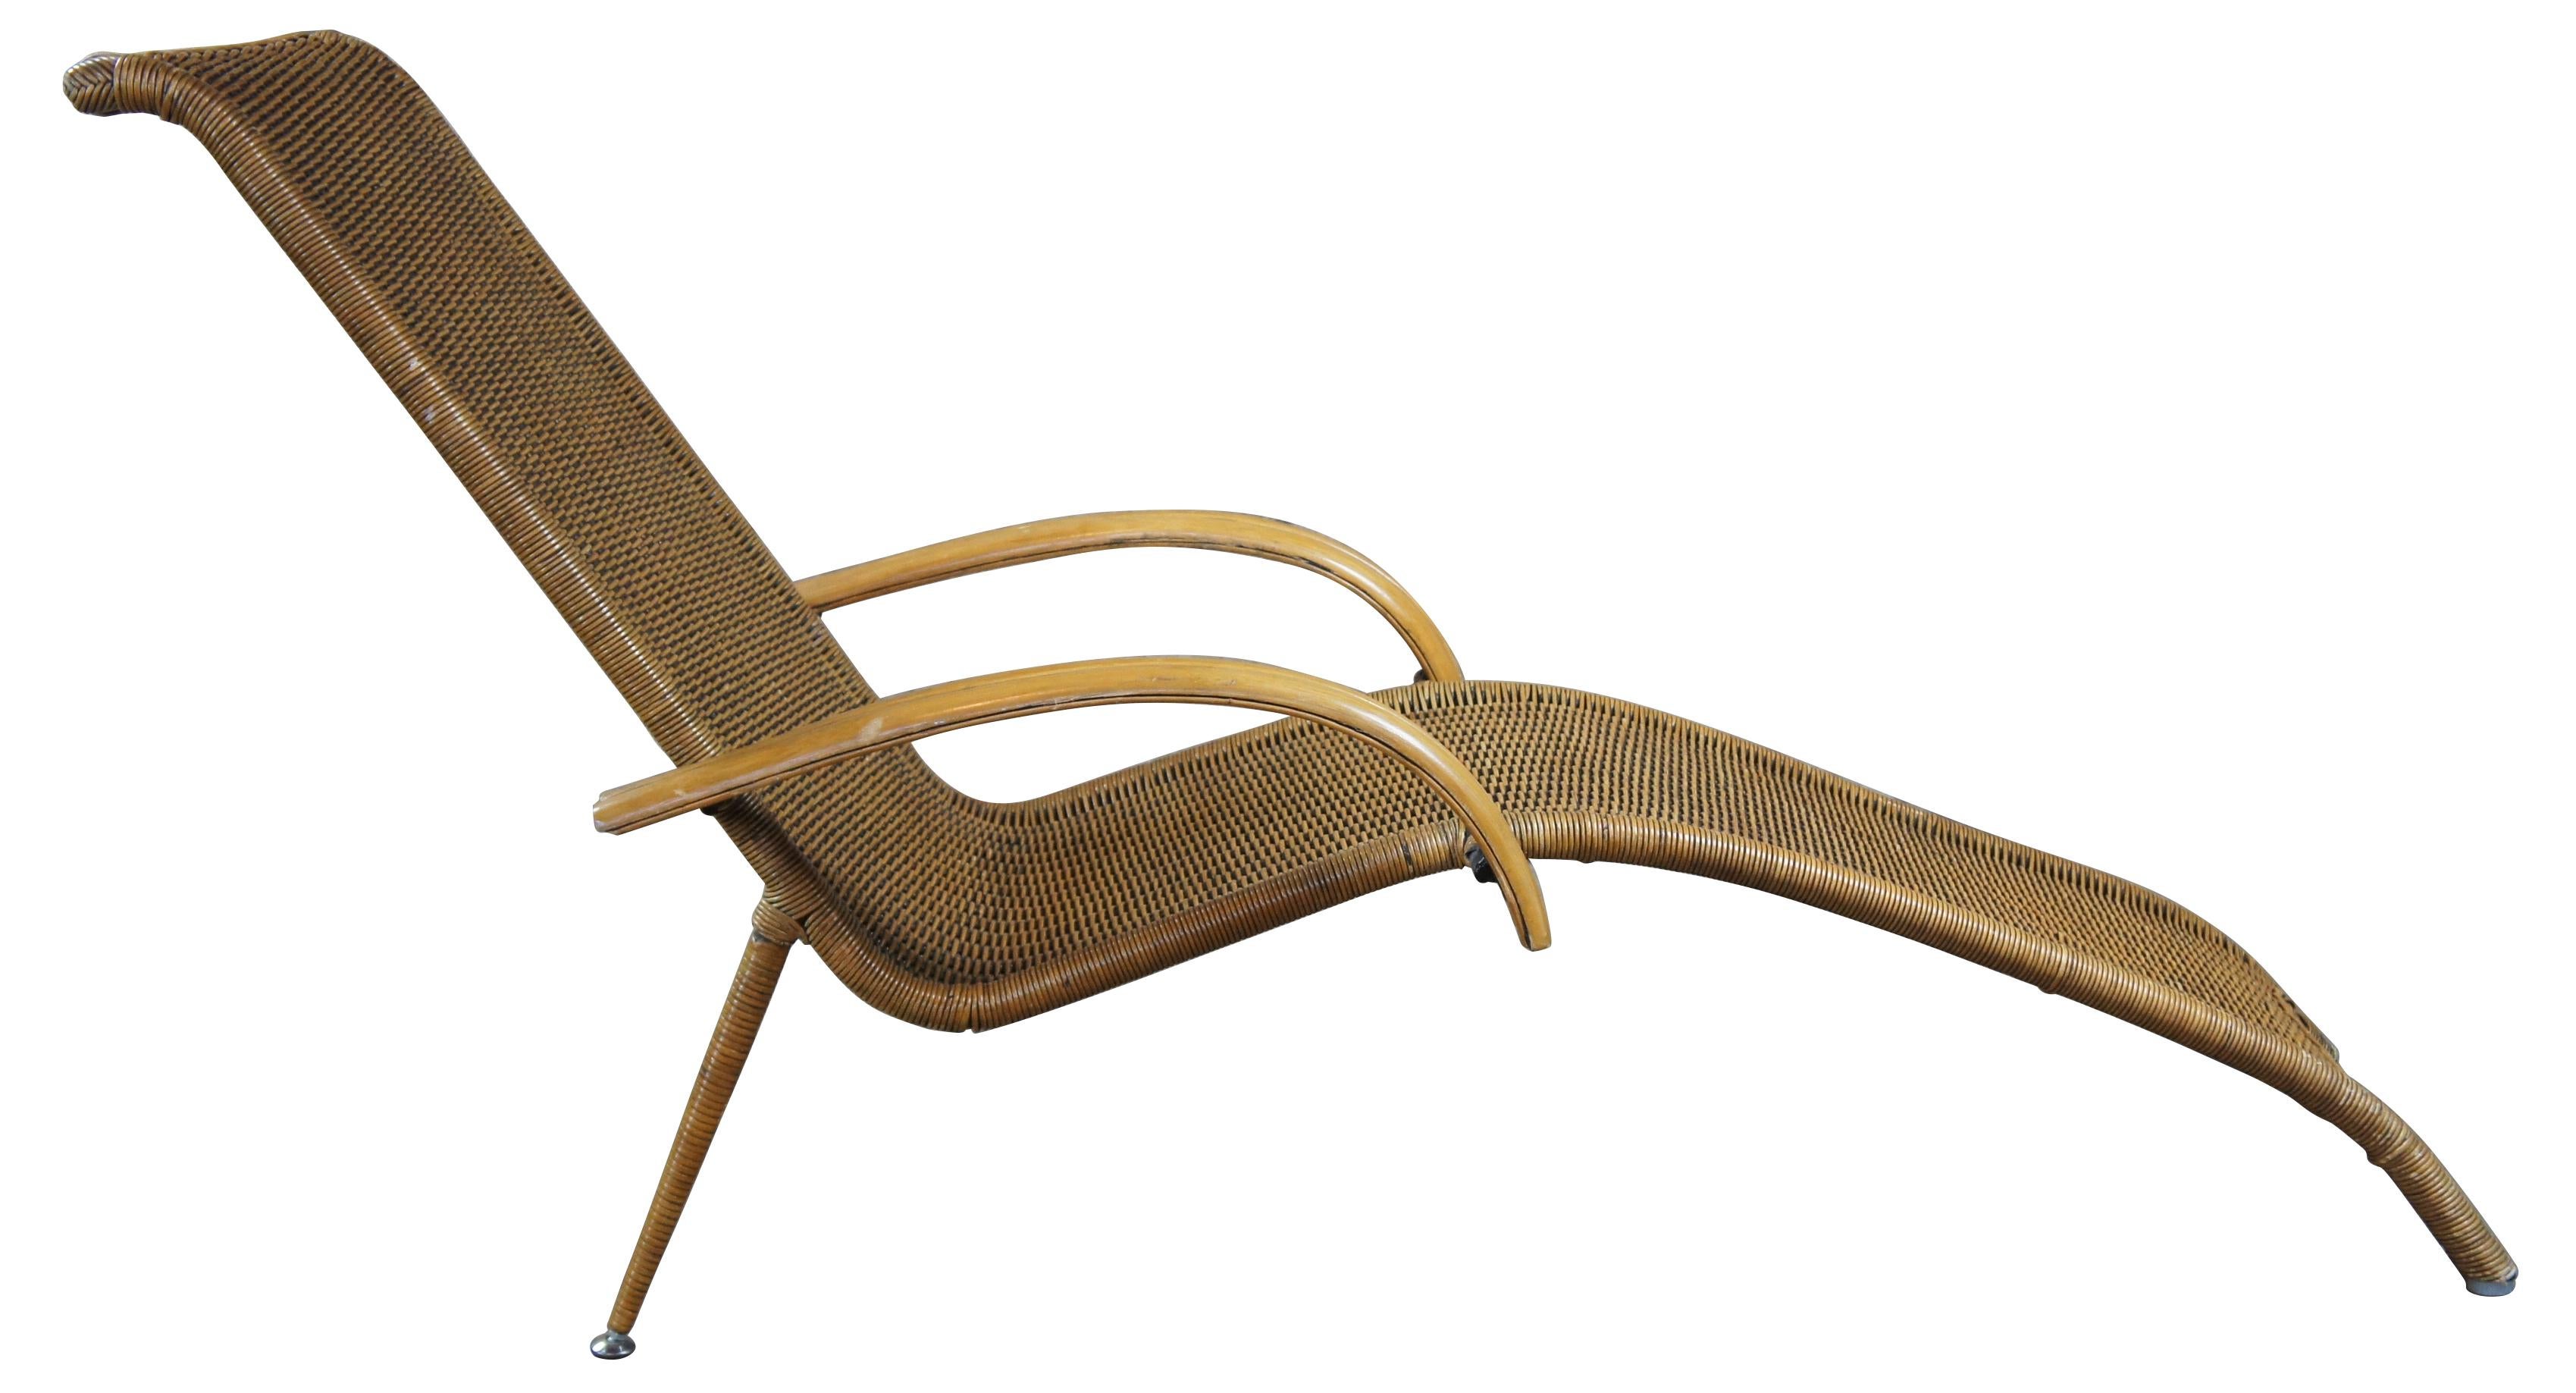 Bauhaus Midcentury Sculptural Italian Modern Cane and Bamboo Chaise Lounge Patio Chair